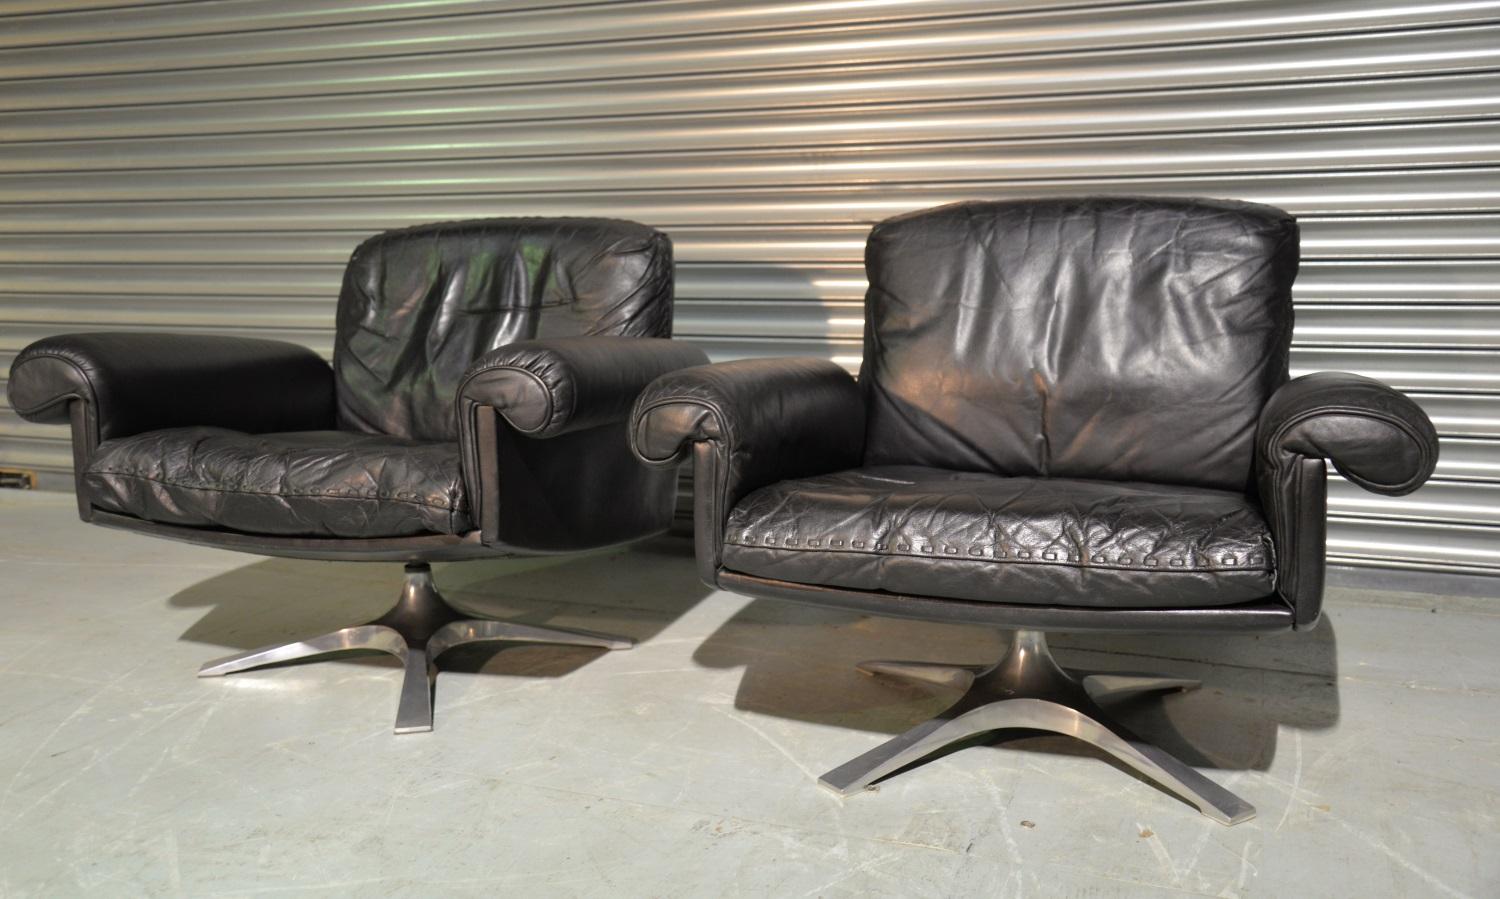 Discounted airfreight for our US Continent and International customers (from 2 weeks door to door)

We are delighted to bring to you a pair of highly desirable vintage De Sede DS-31 swivel lounge armchairs in stunning soft black aniline leather with